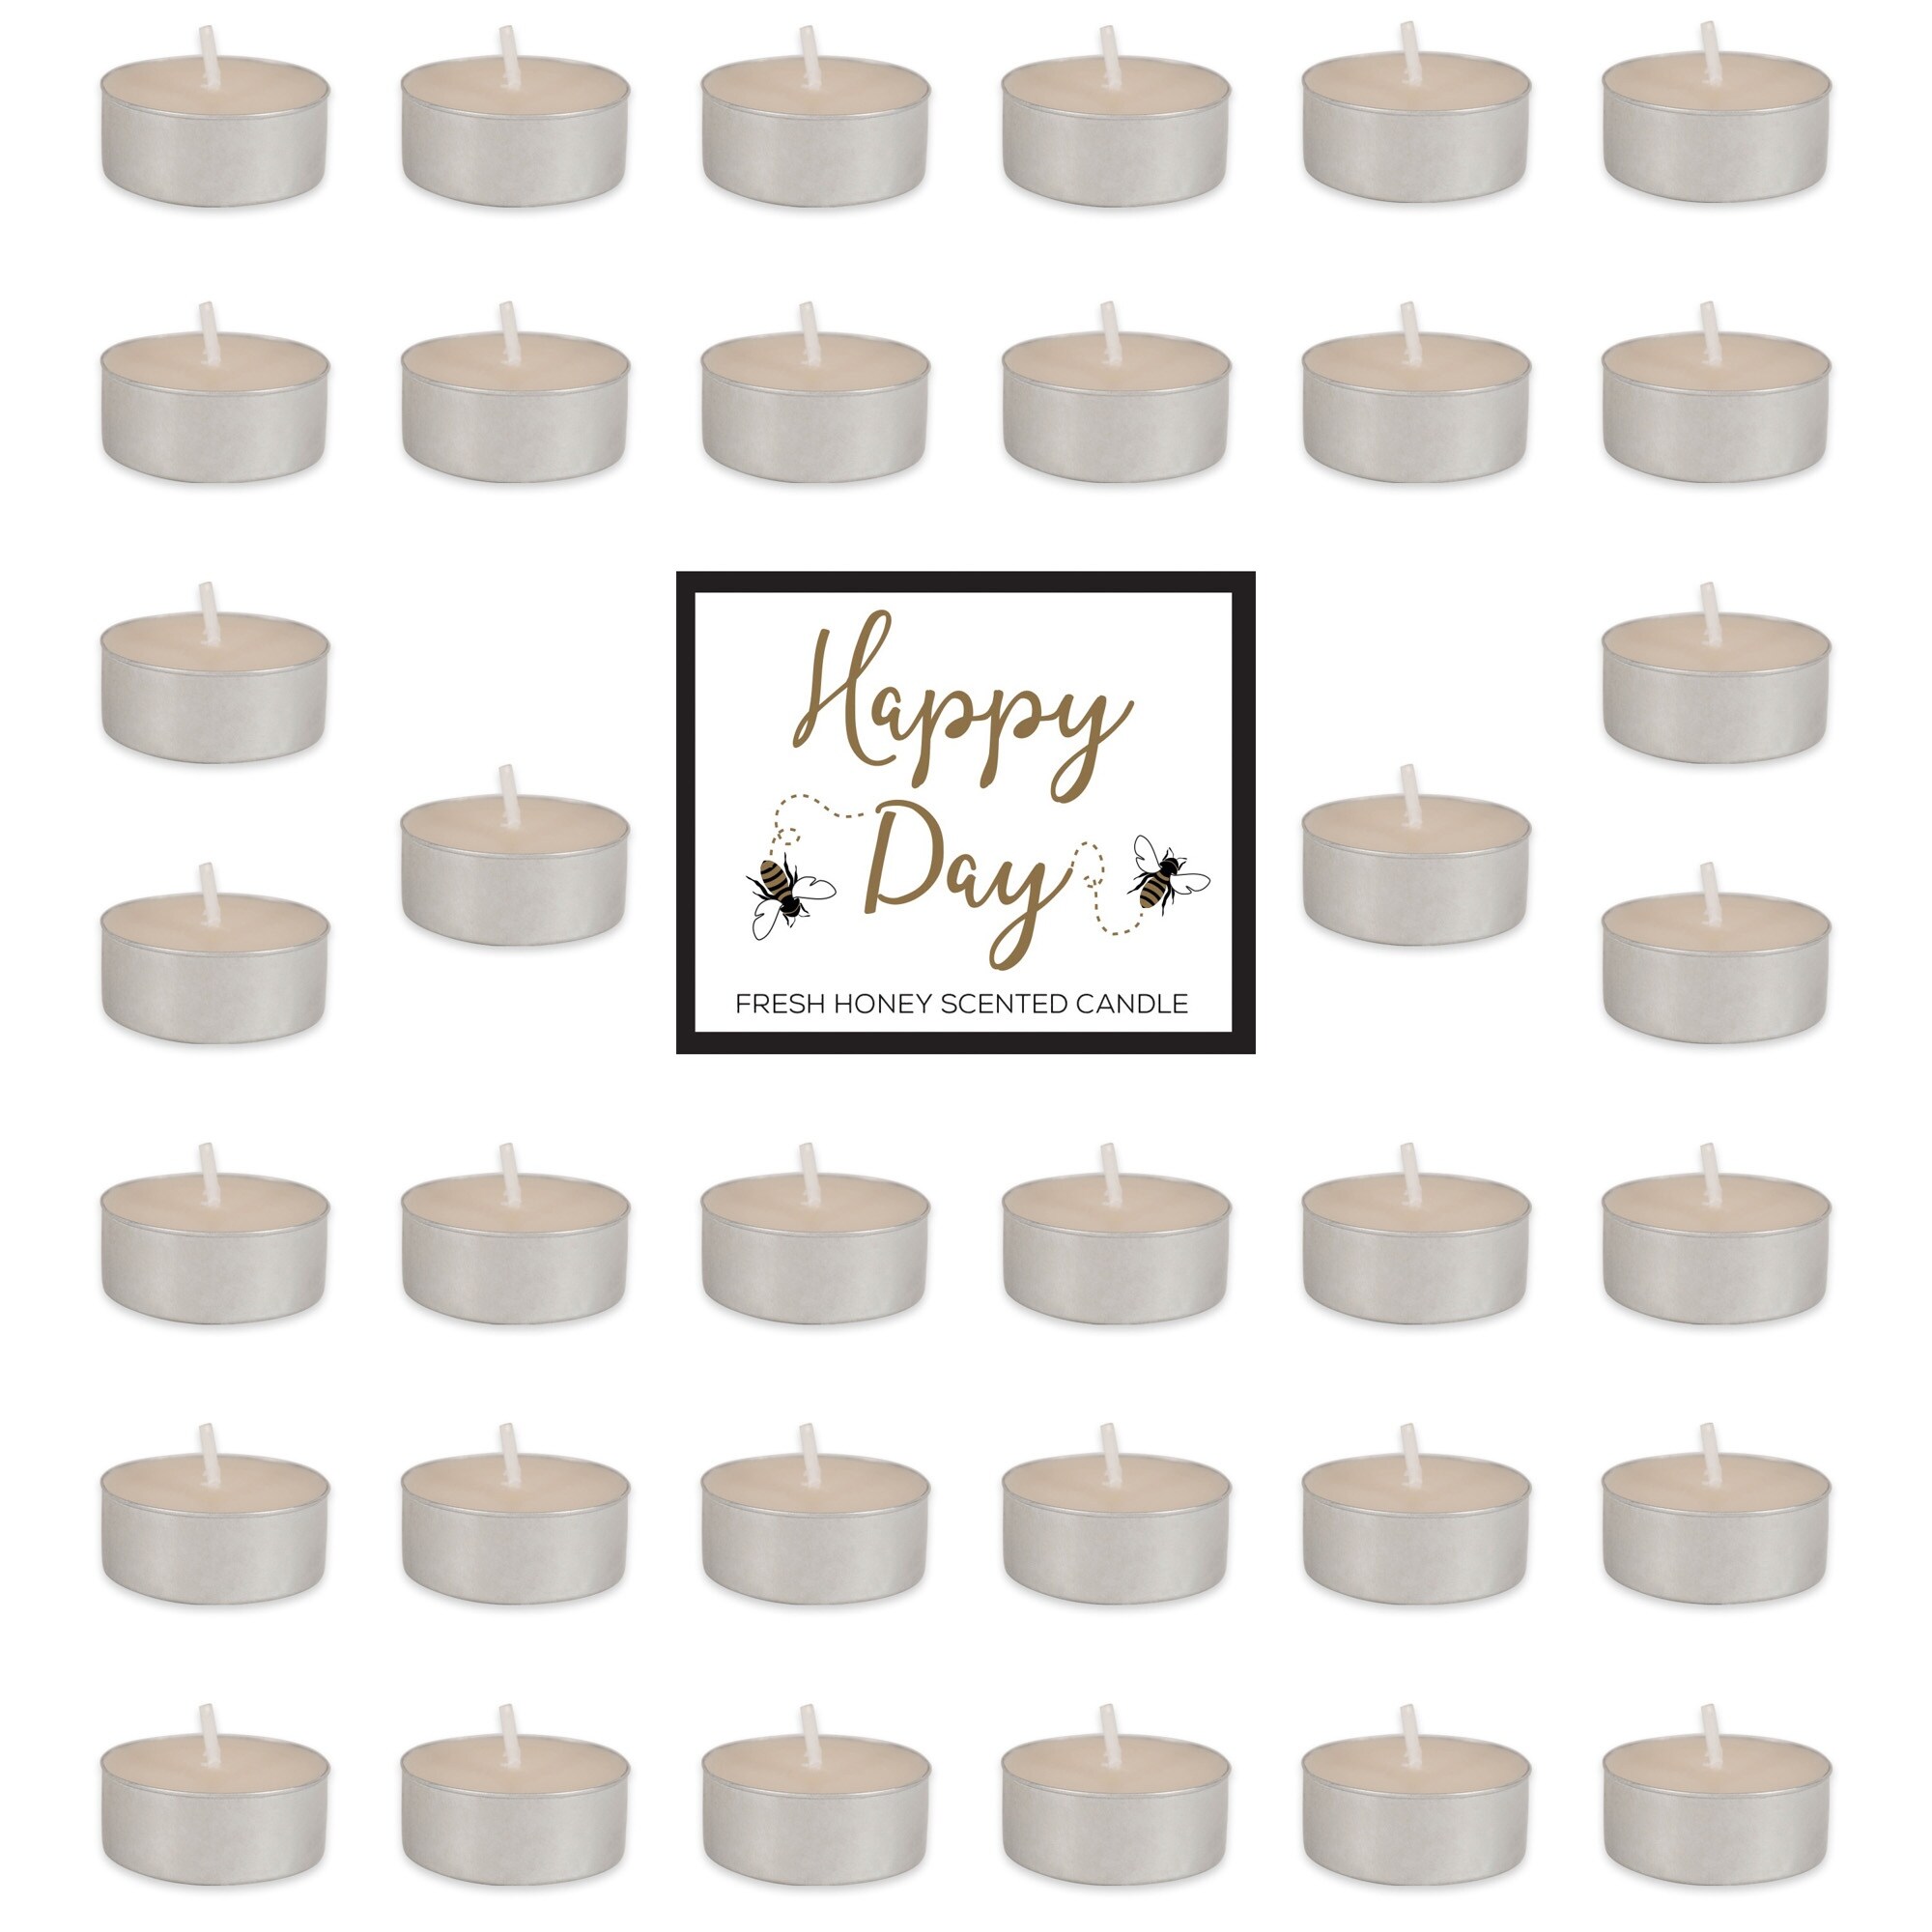 Set of 36 1.5" Yellow, Black, and White Happy Day Honey Tealights